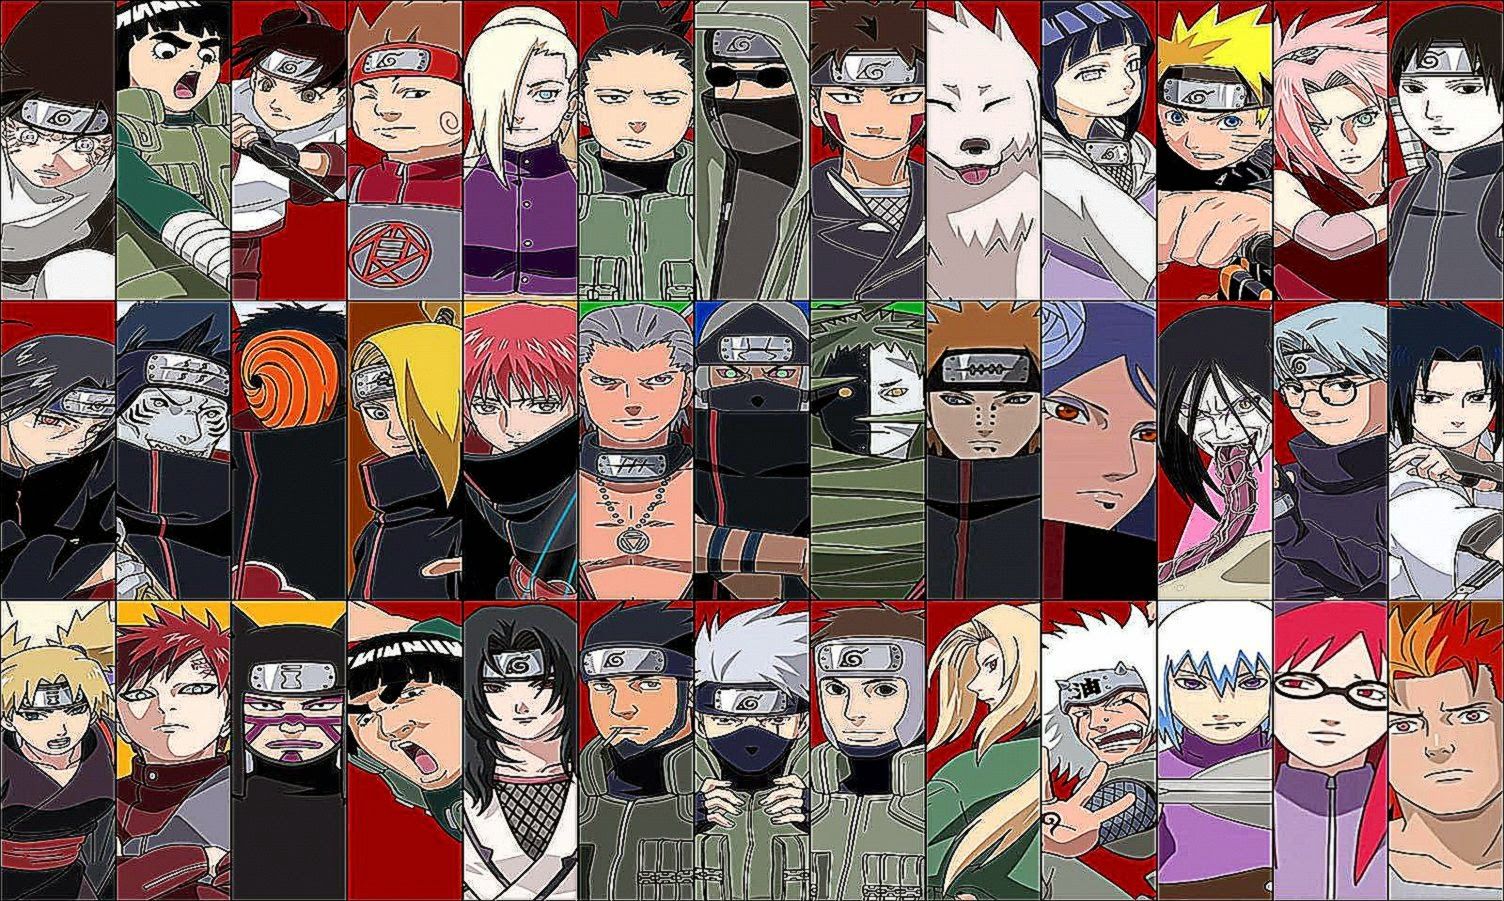 Naruto Shippuden Characters Wallpaper HD. Background Wallpaper Gallery